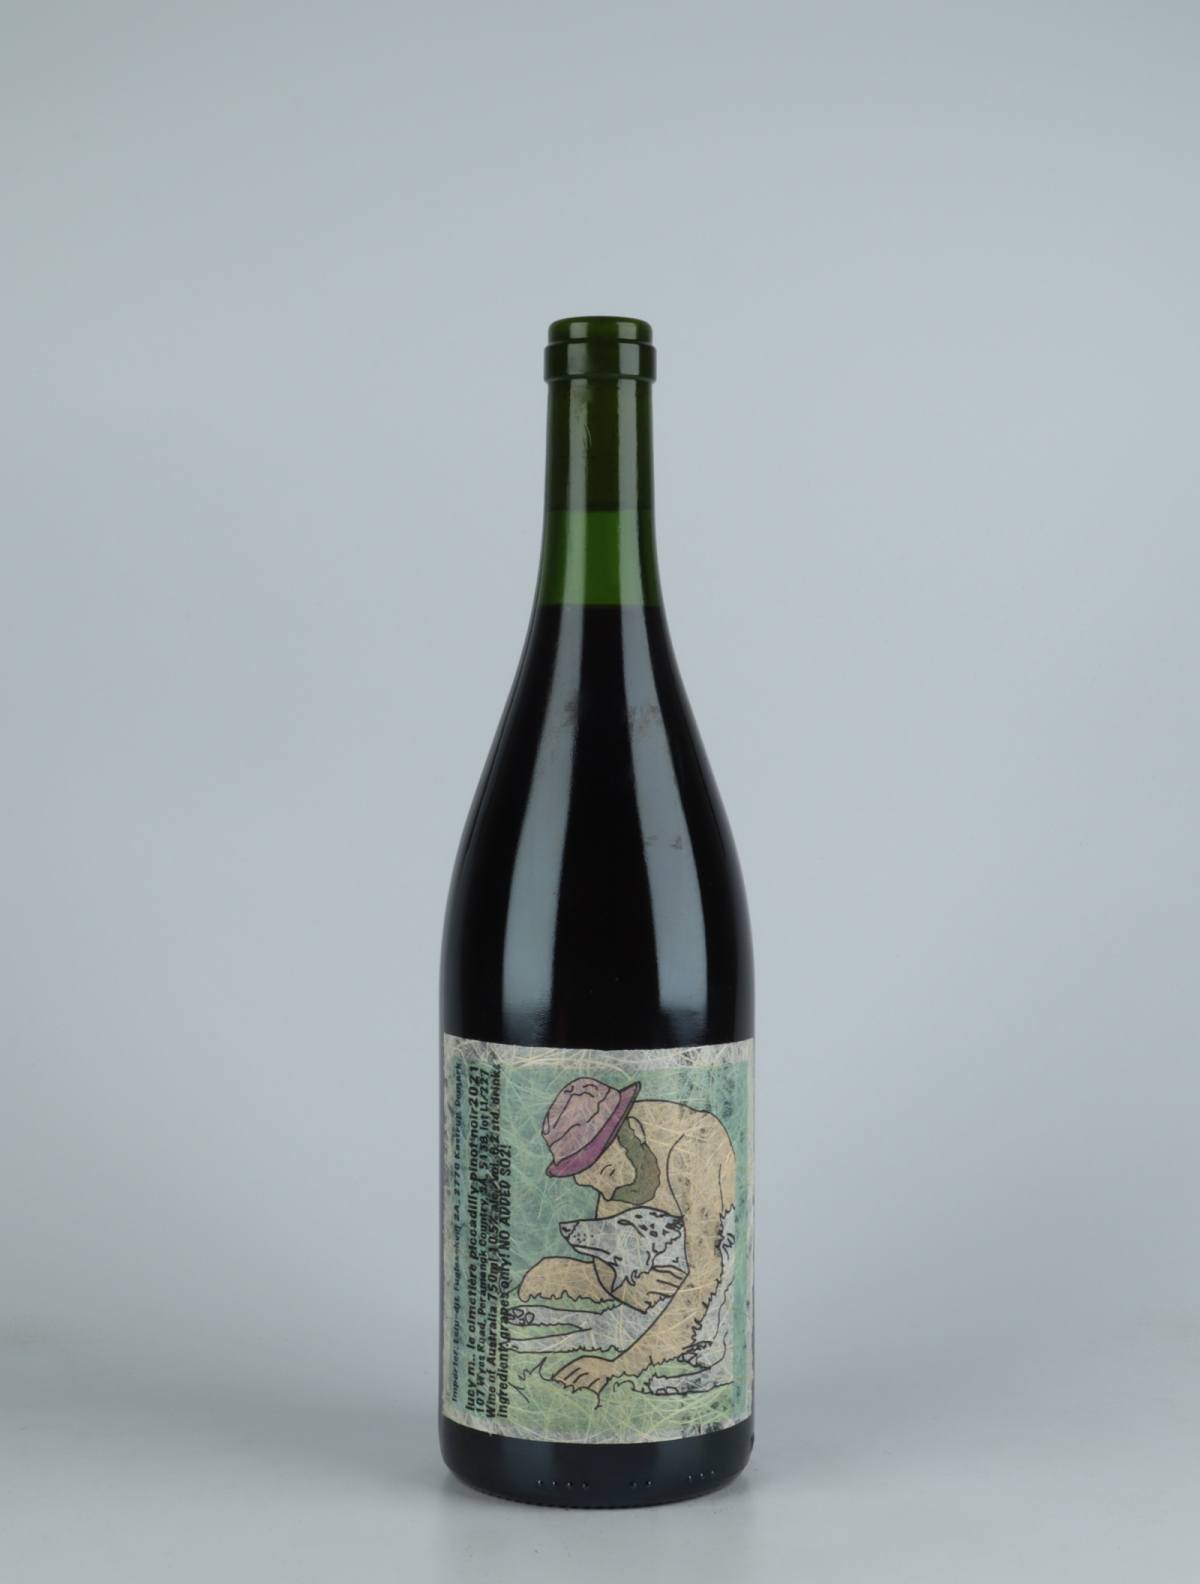 A bottle 2021 Le Cimetière Piccadilly Pinot Noir Red wine from Lucy Margaux, Adelaide Hills in Australia